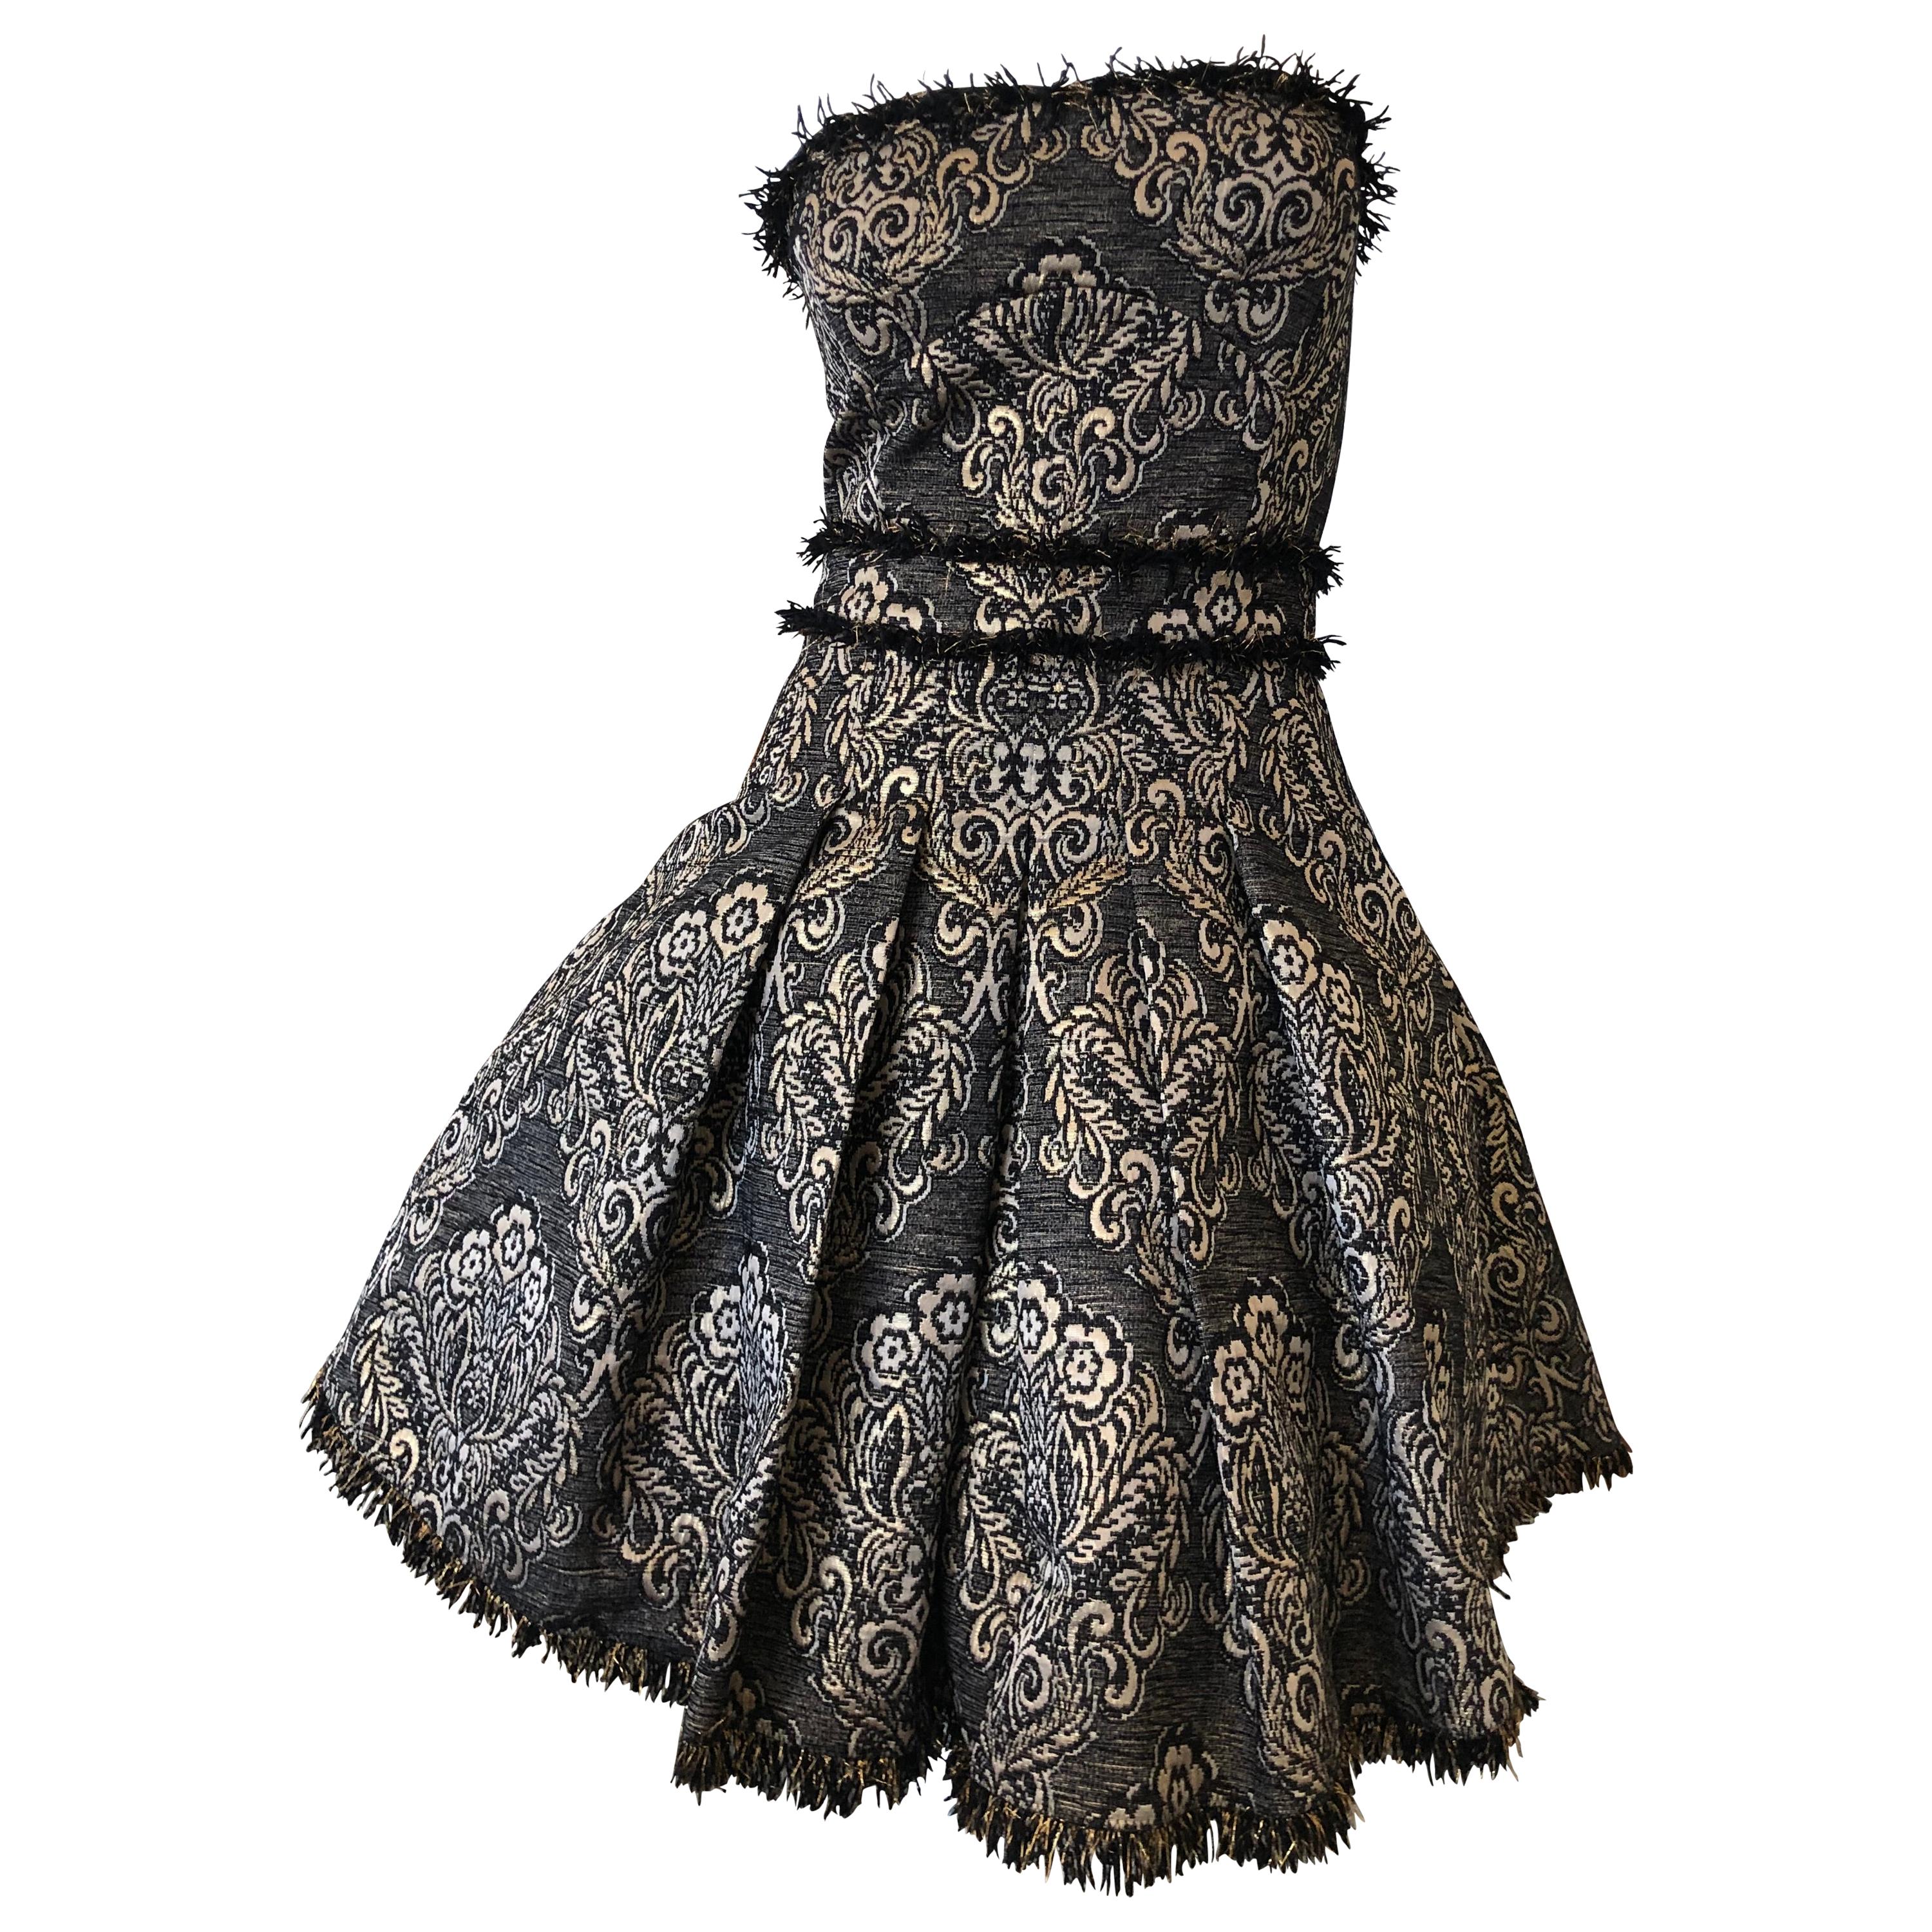  D&G Strapless Mini Ball Gown with Full Corset & Petticoats by Dolce & Gabbana For Sale